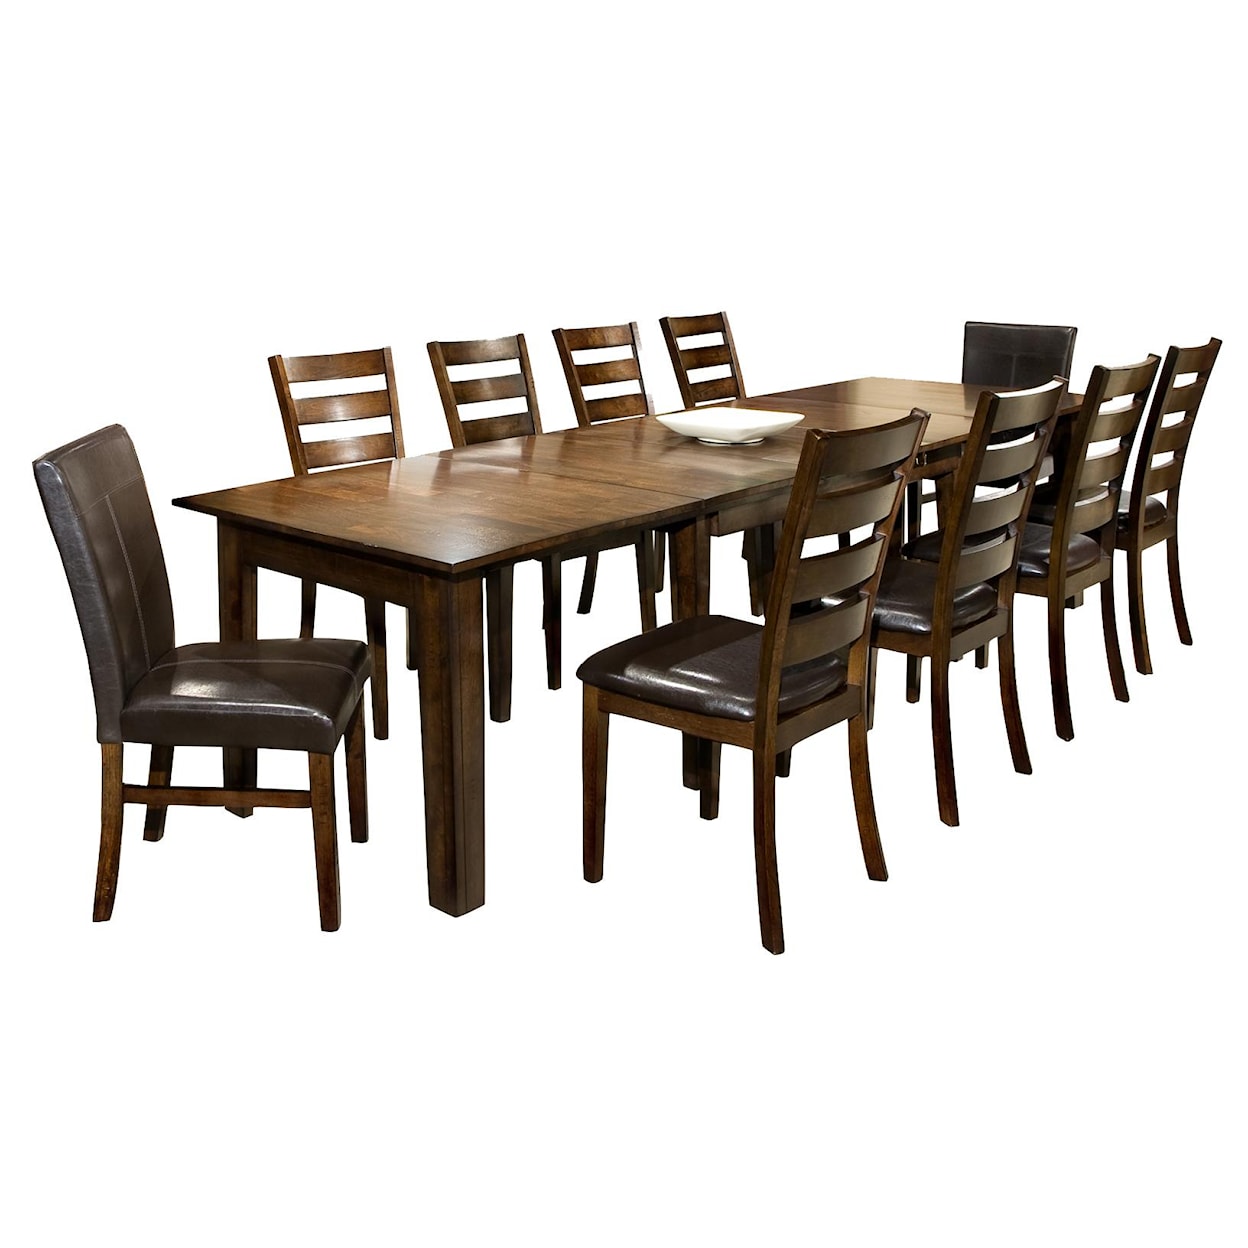 Intercon Kona Dining Table with 3 Leaves